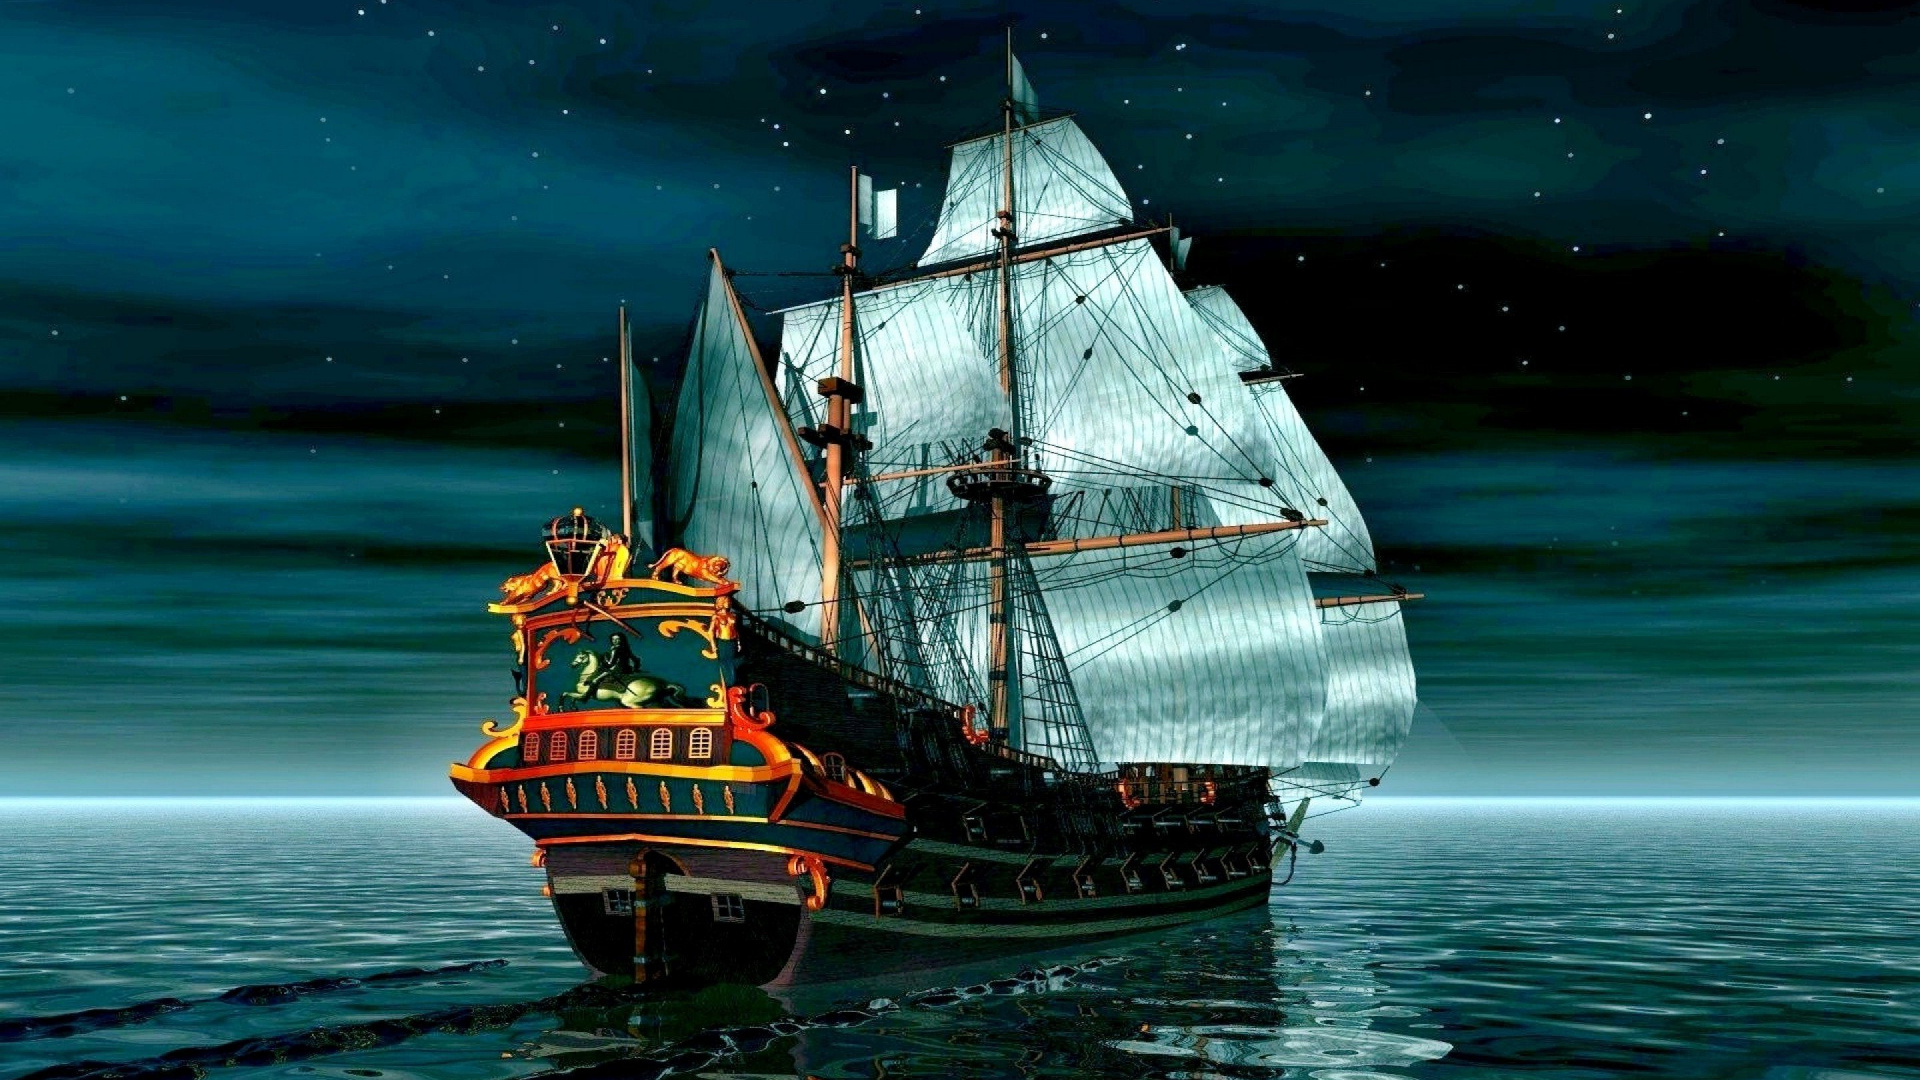 Brown and Black Galleon Ship on Sea During Night Time. Wallpaper in 1920x1080 Resolution